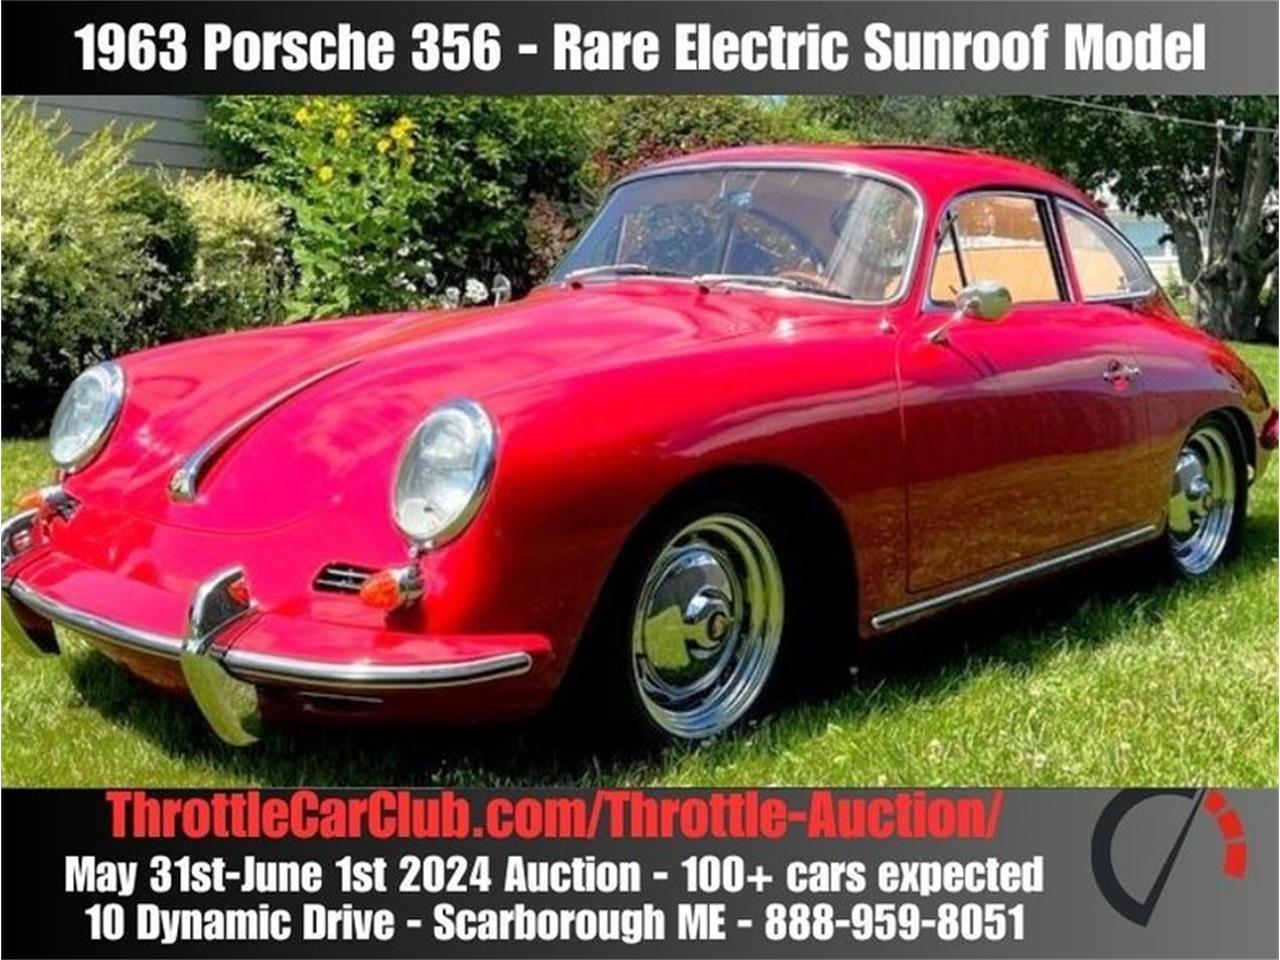 For Sale at Auction: 1963 Porsche 356 in Scarborough, Maine